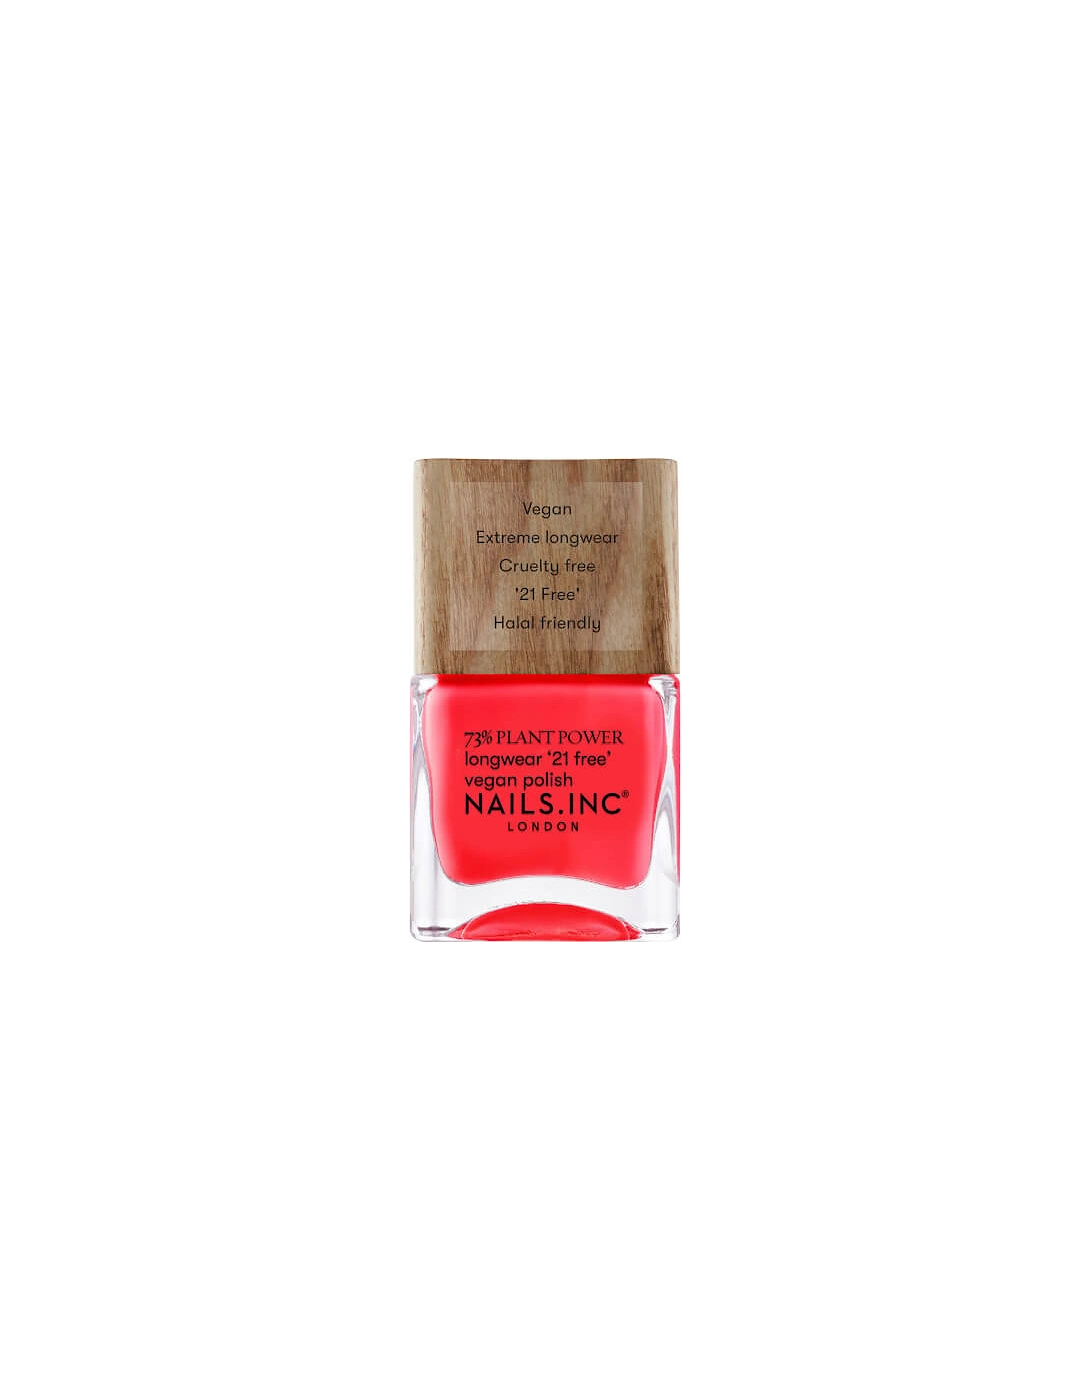 nails inc. 73% Plant Power Nail Varnish - Time for a Reset 14ml, 2 of 1